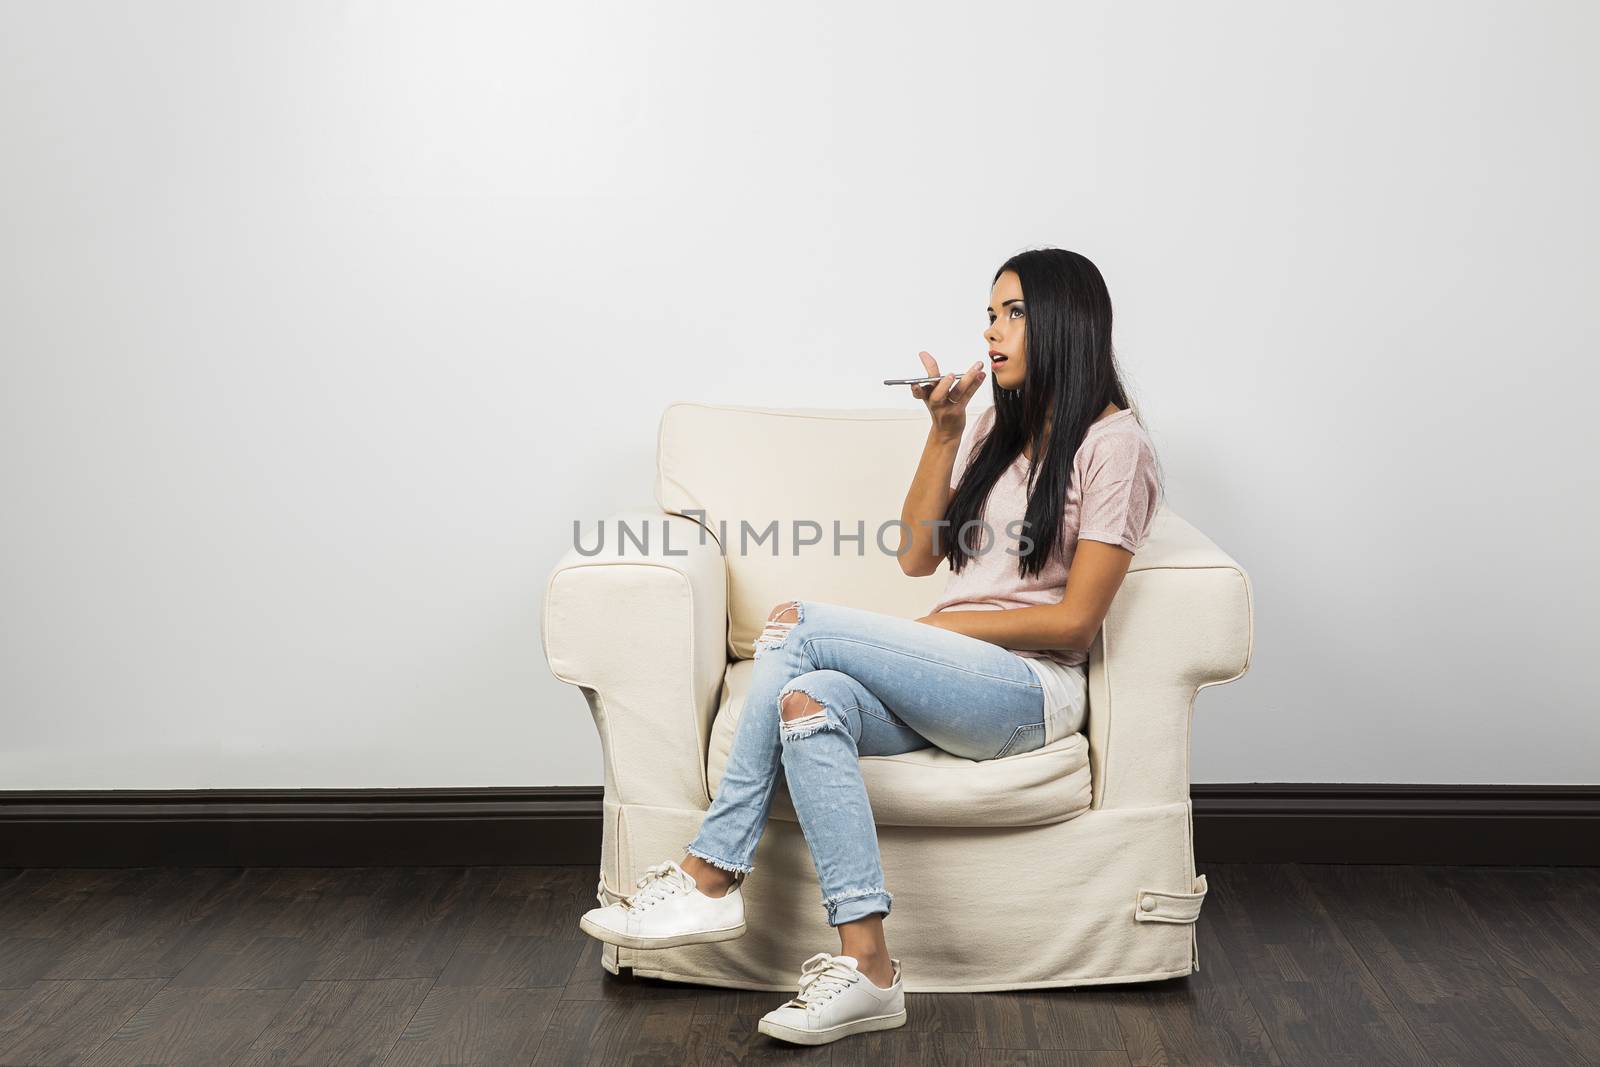 Young woman, sitting on a white couch, talking on her phone